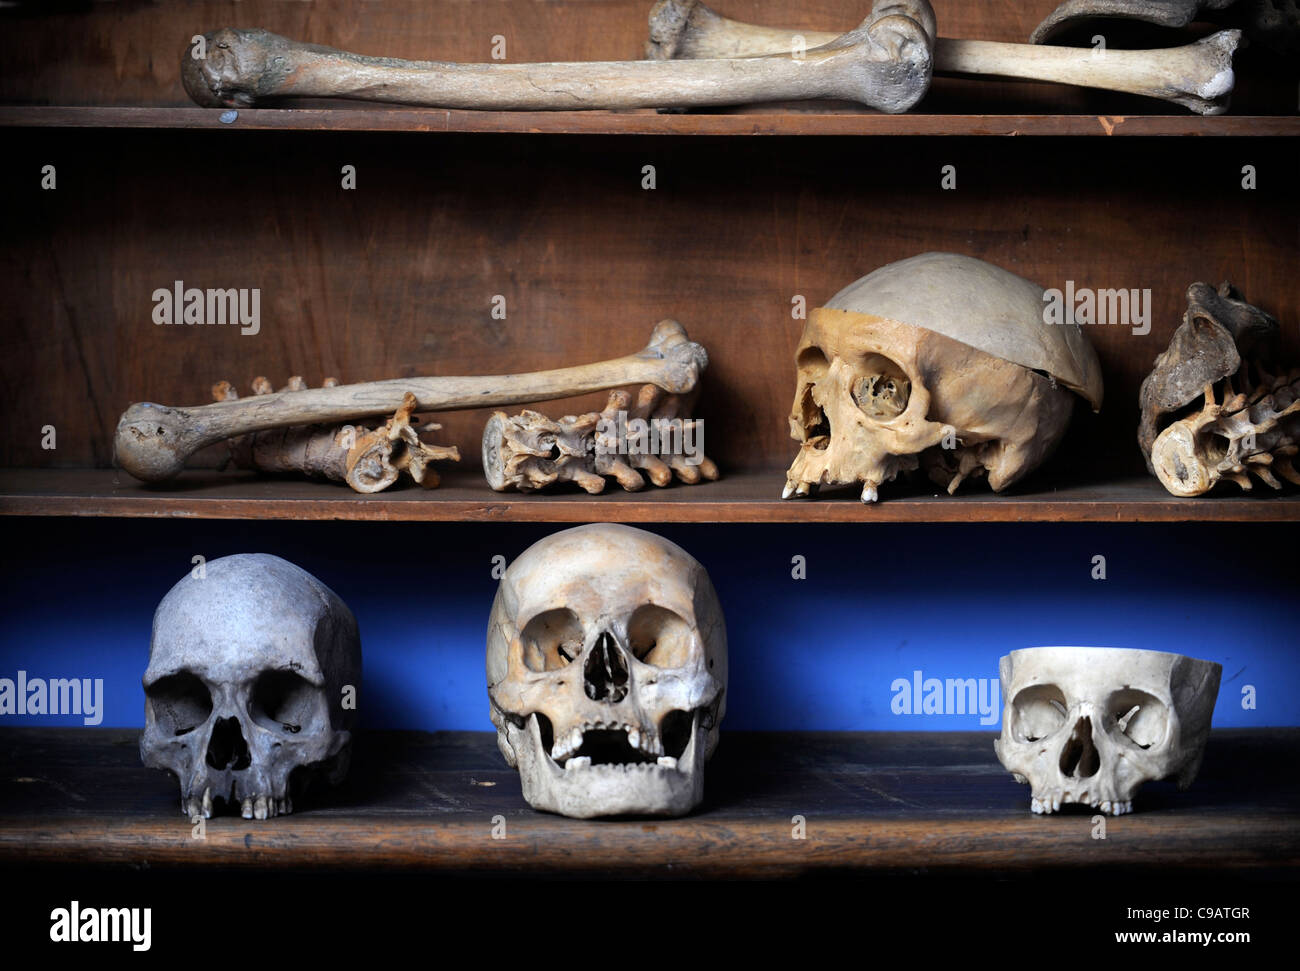 The Shambles Victorian Village in Newent, Gloucestershire - a museum of Victoriana - Skulls and bones in the doctor's surgery Stock Photo